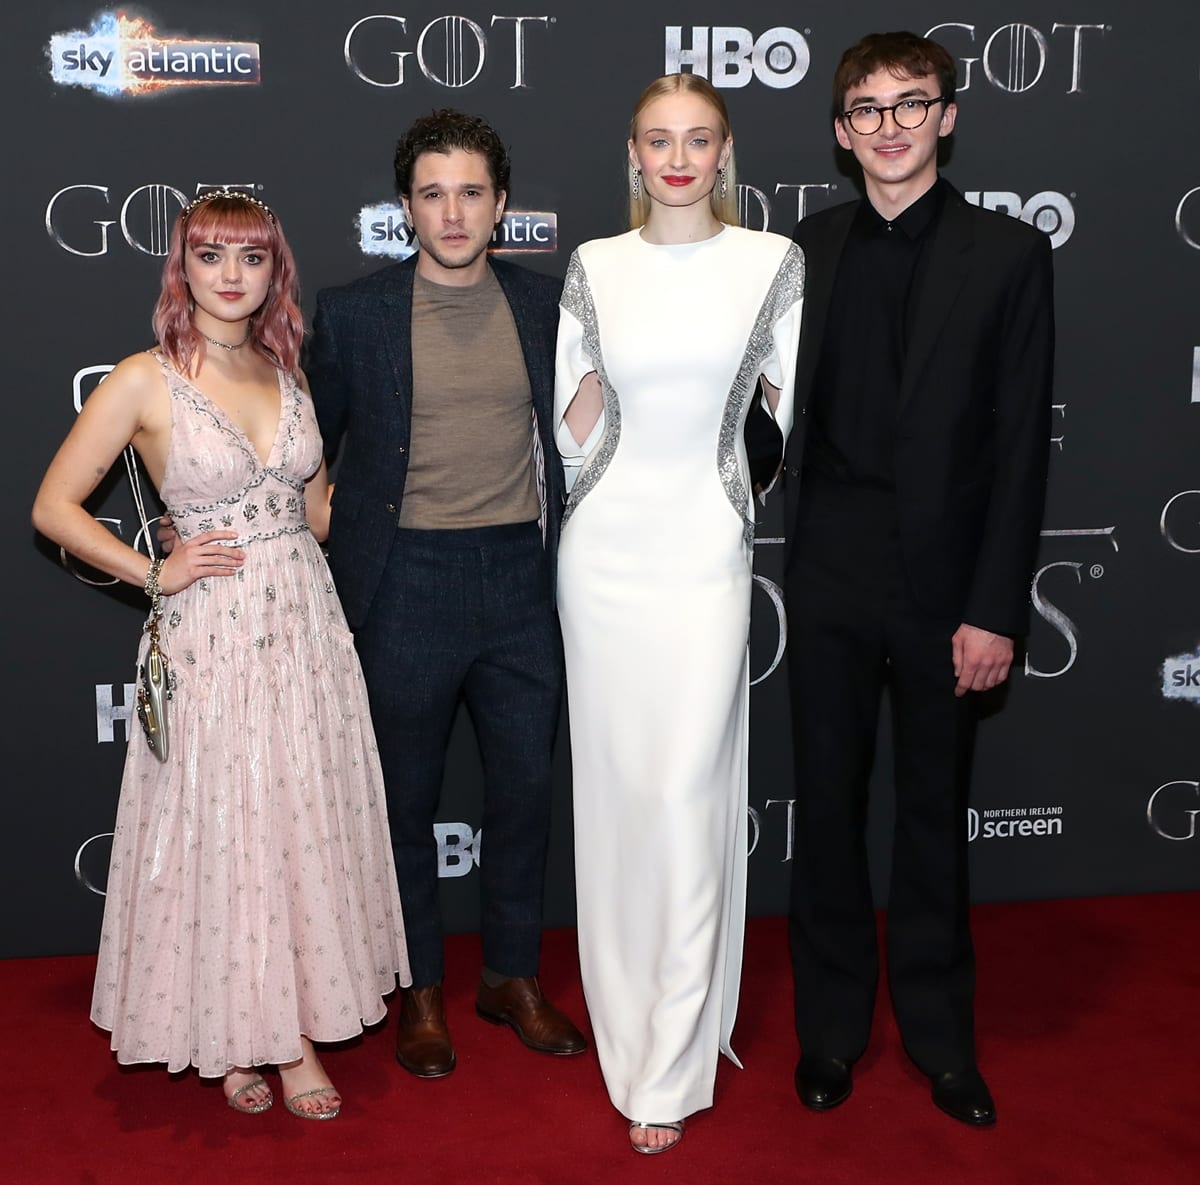 Maisie Williams, Kit Harington, Sophie Turner, and Isaac Hempstead Wright at the Season 8 premiere of "Game of Thrones"